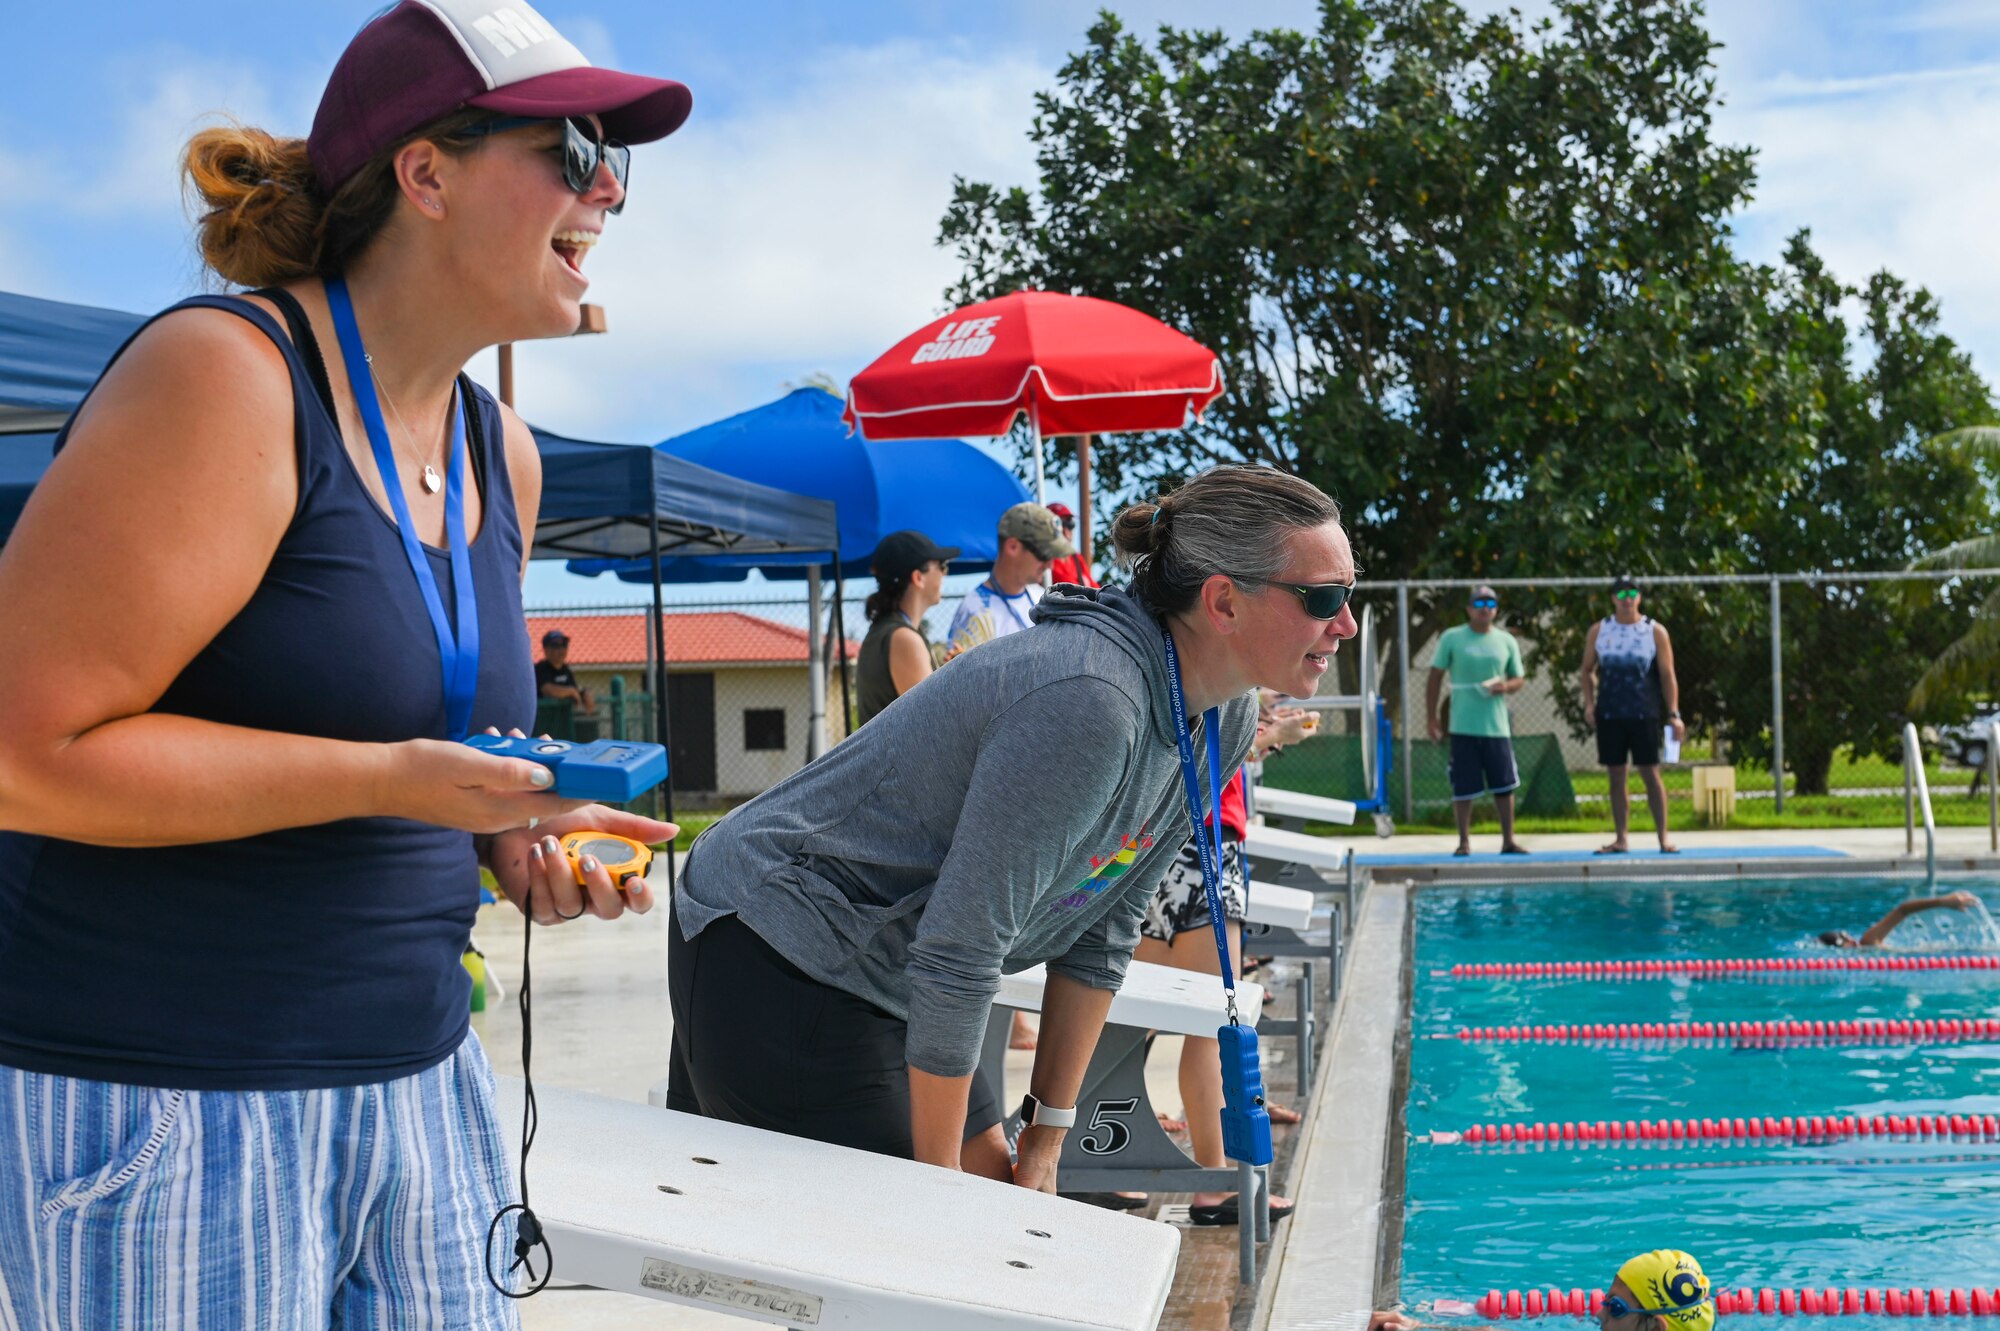 Two timekeepers cheer on a swimmer